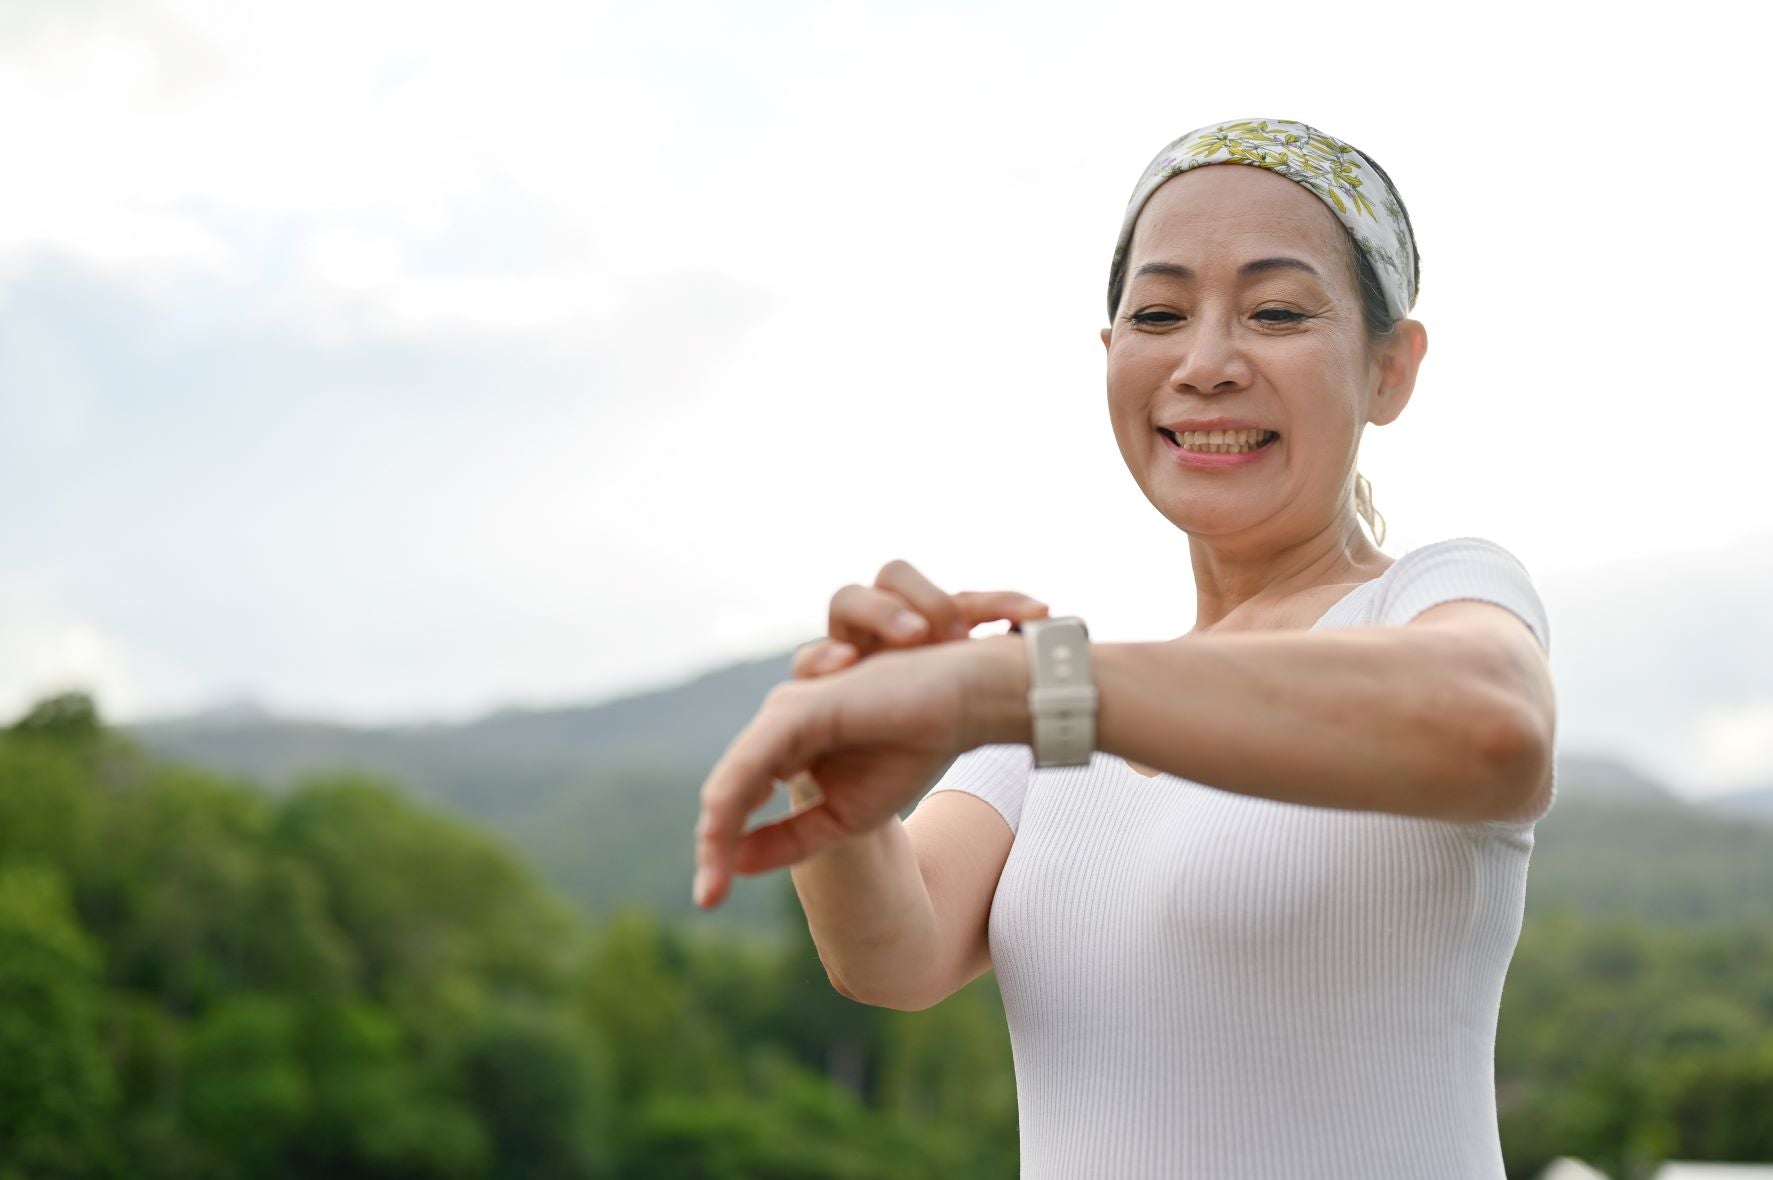 Wearable Fitness Tracker To Consider Wearing Recommended By The Herbal Magic Team